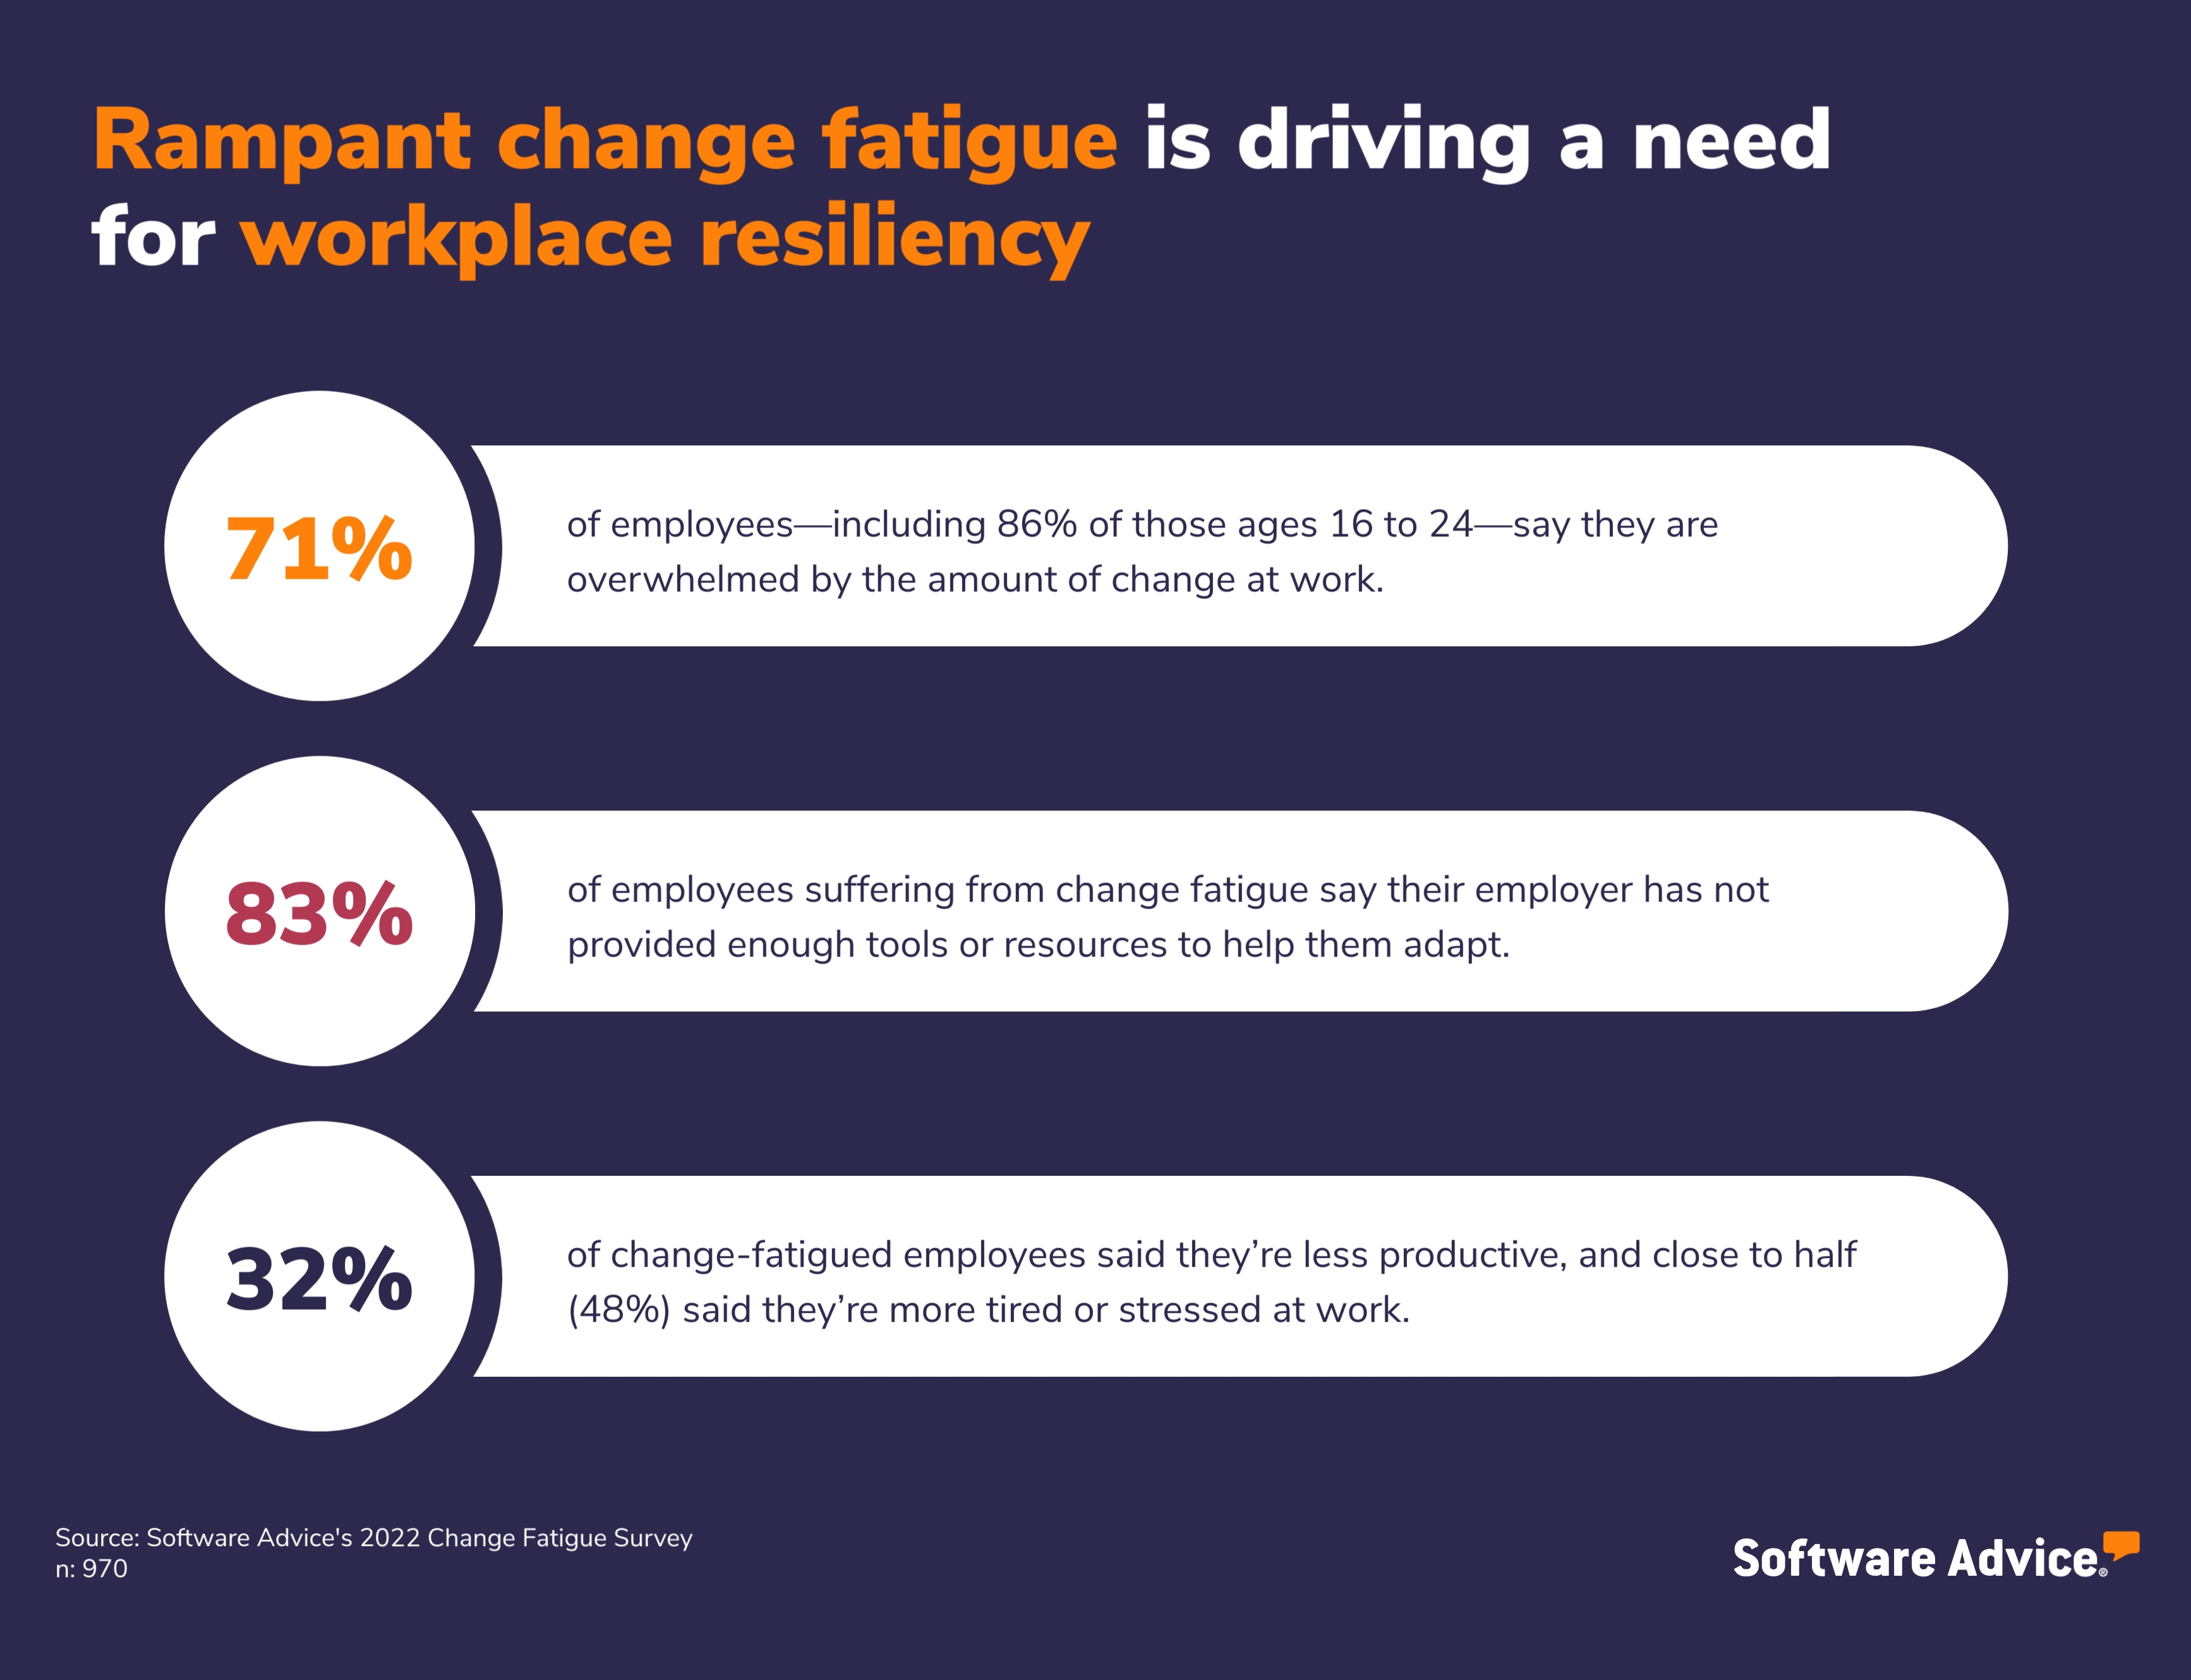 Rampant change fatigue is driving the need for workplace resiliency